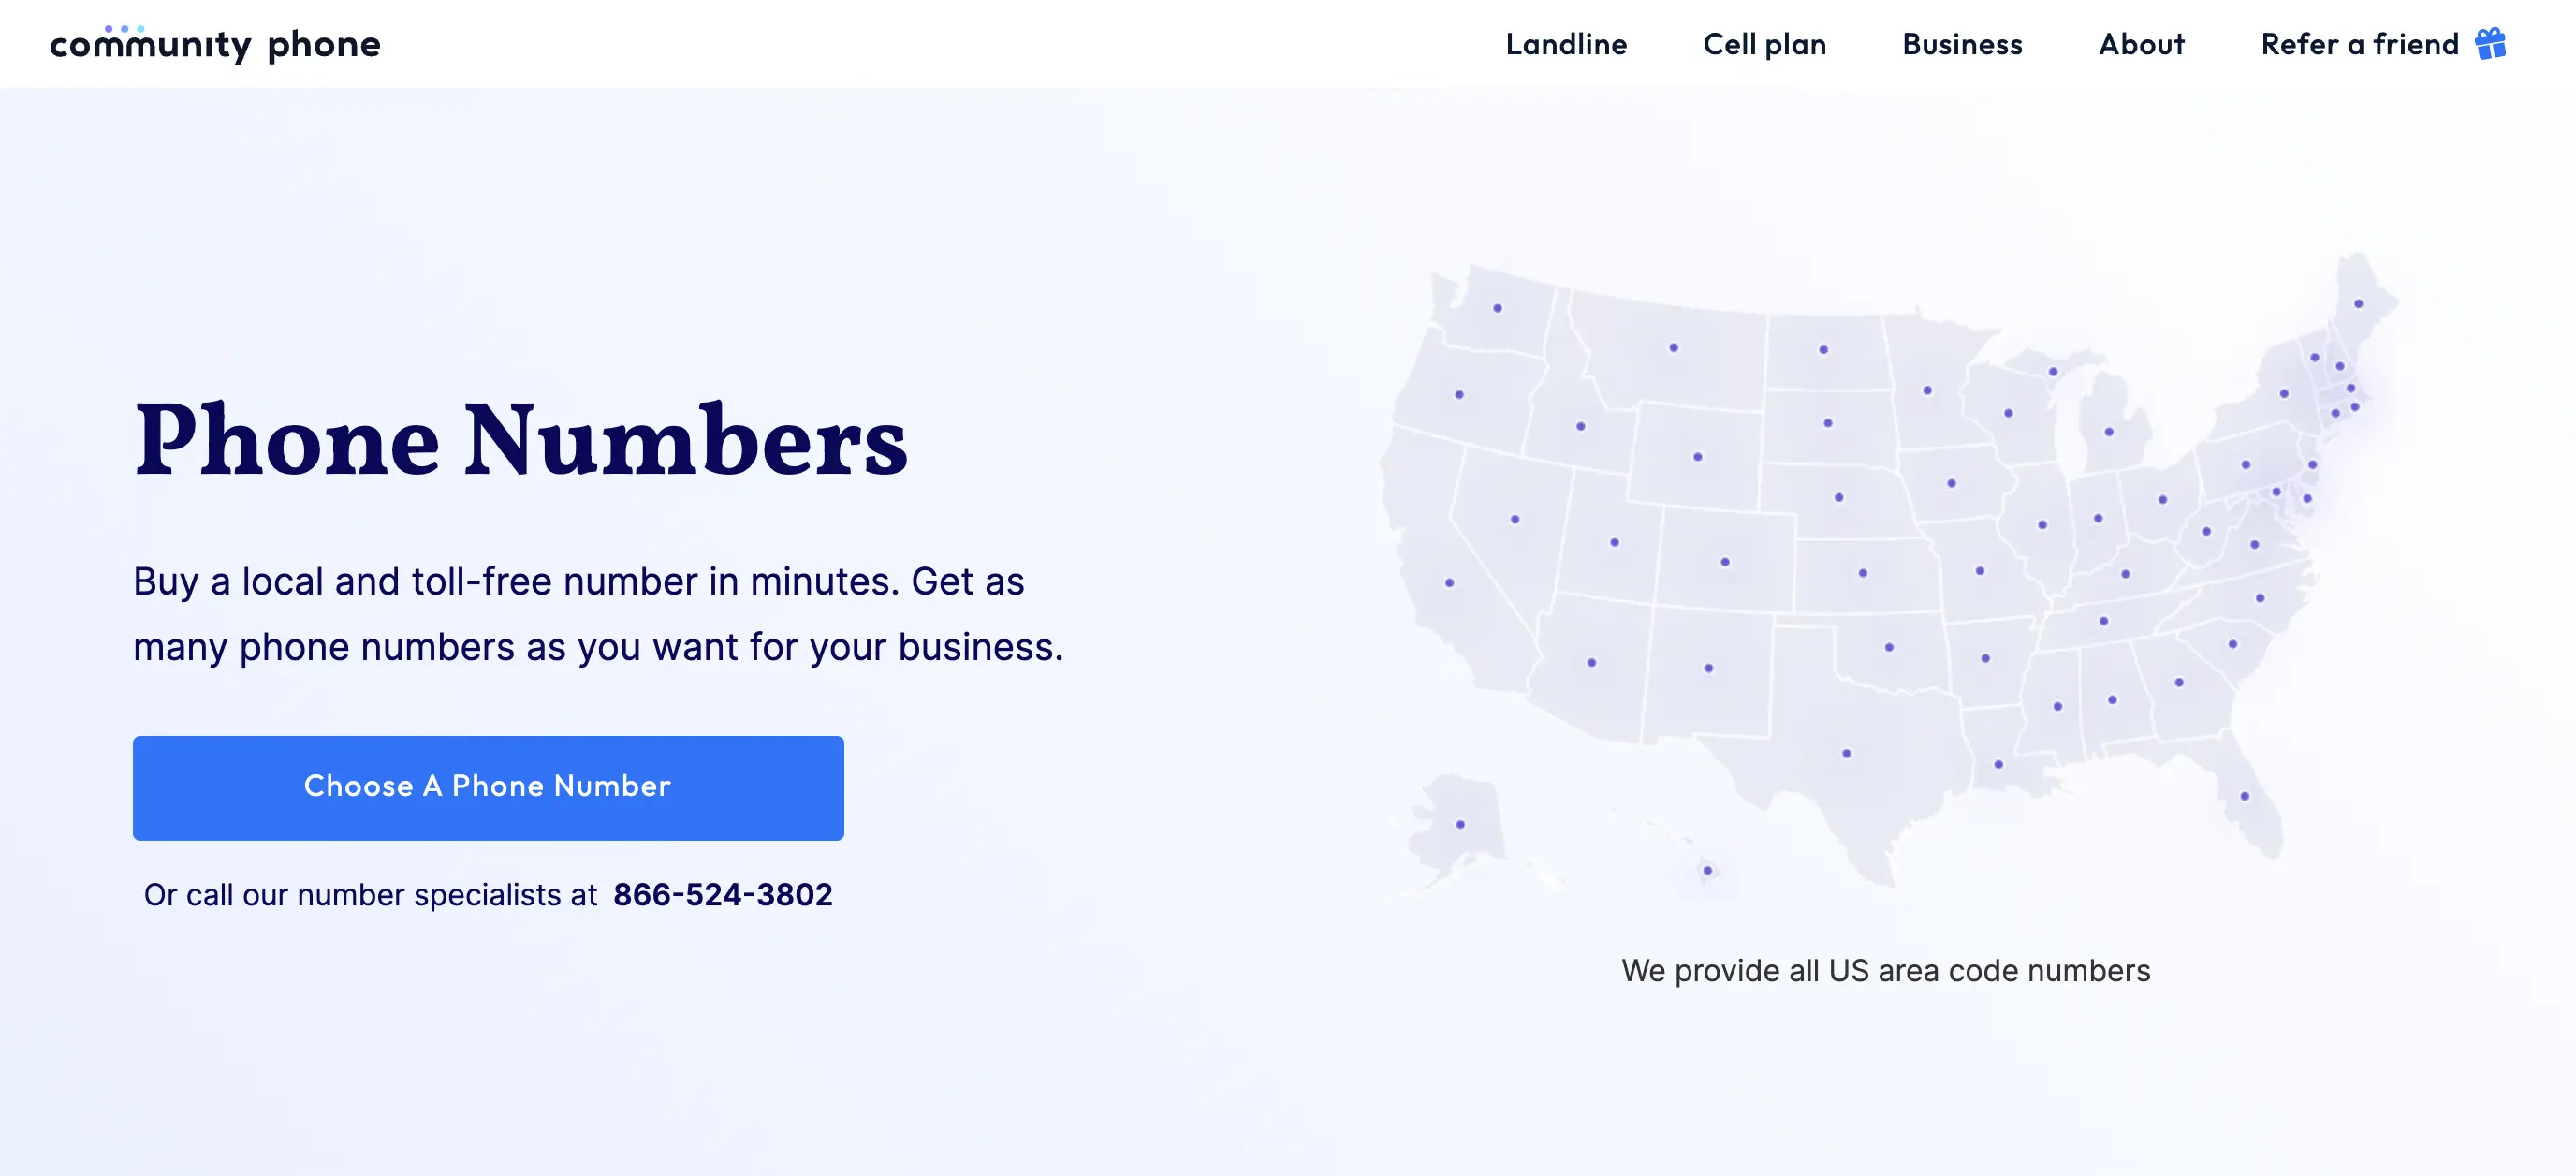 Get a Phone Number with Community Phone